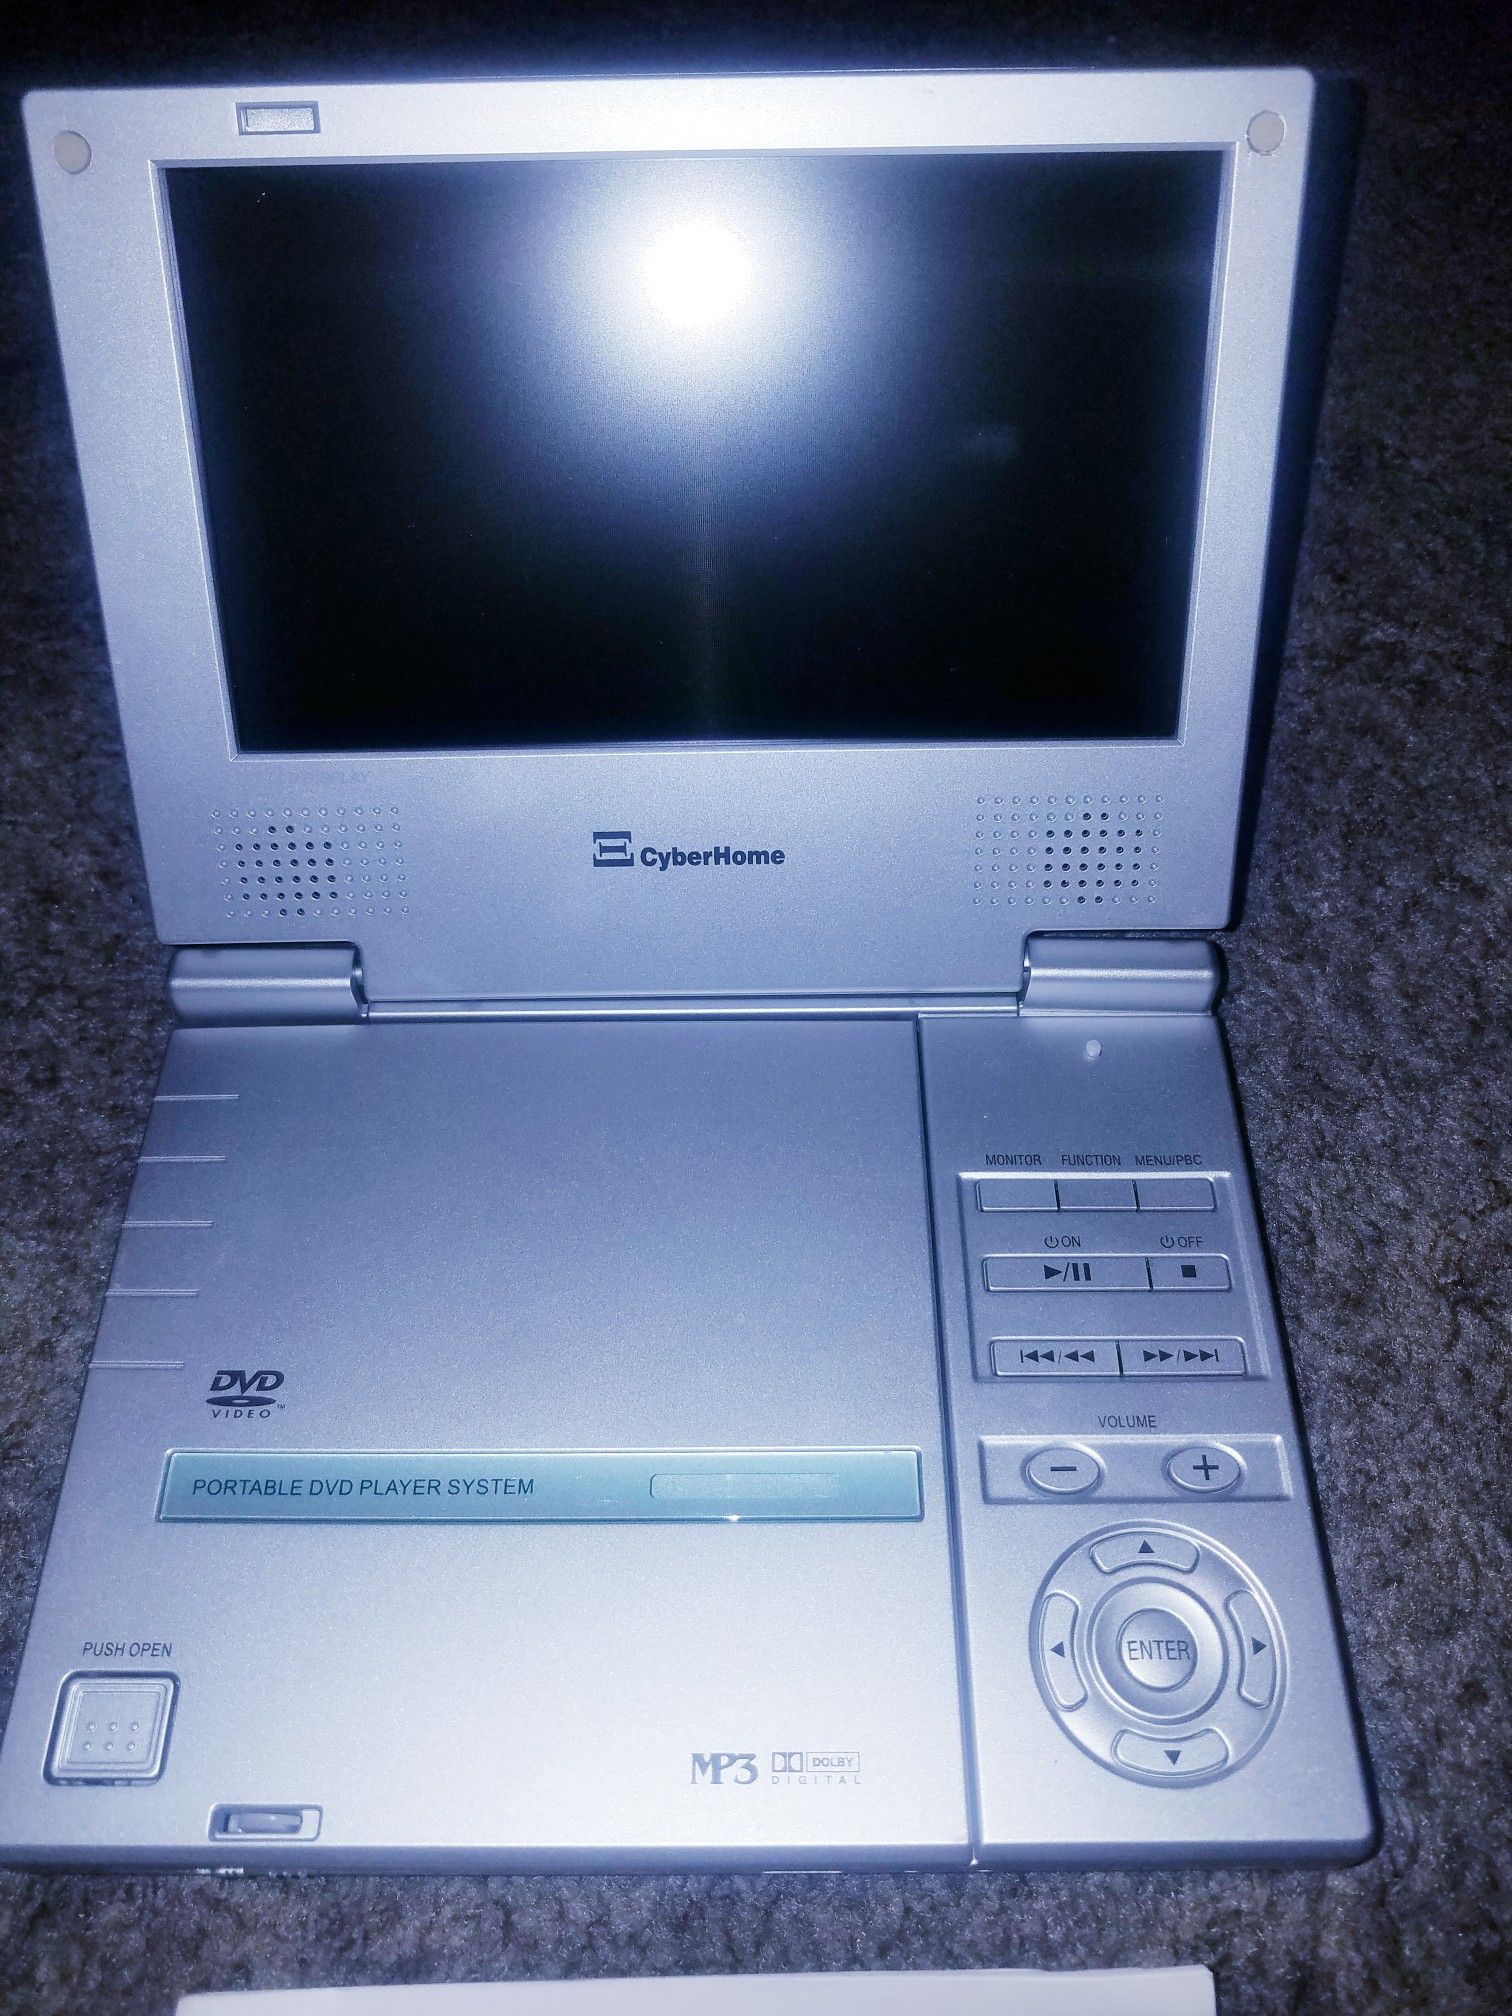 7" Portable Cyberhome DVD Player in Excellent condition